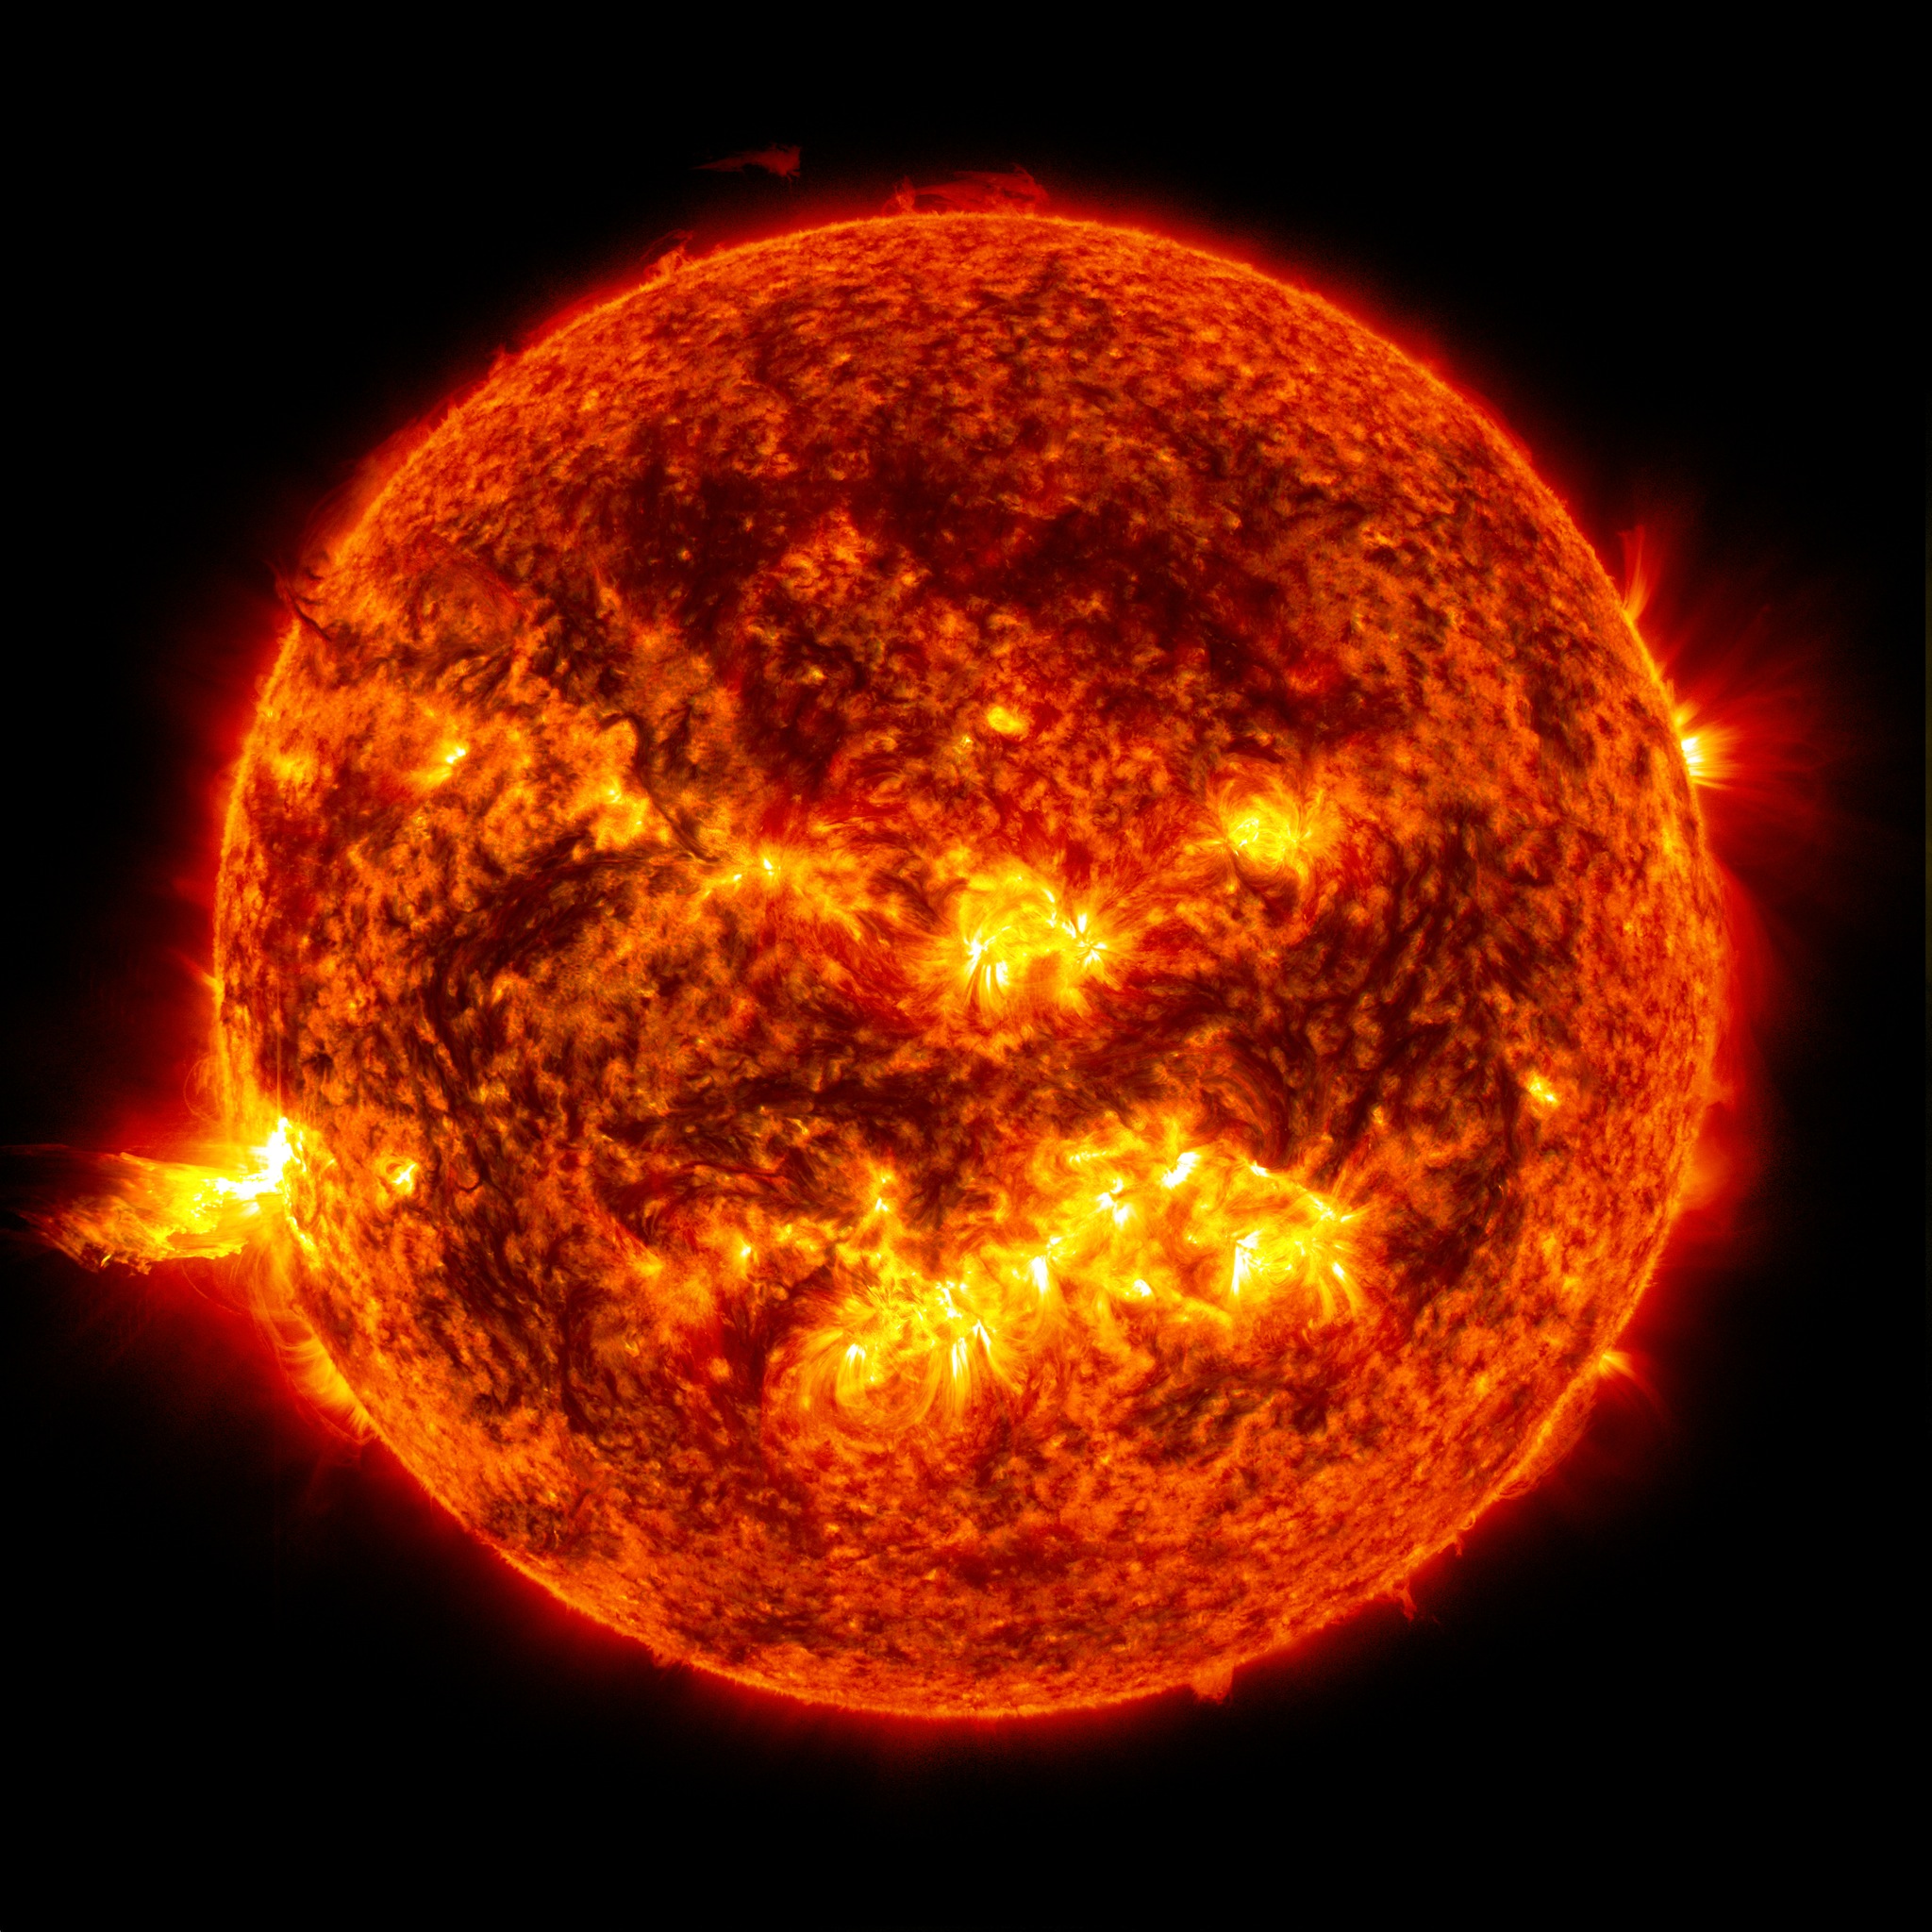 Blended 304 and 171 images from SDO AIA.Credit: NASA/SDO